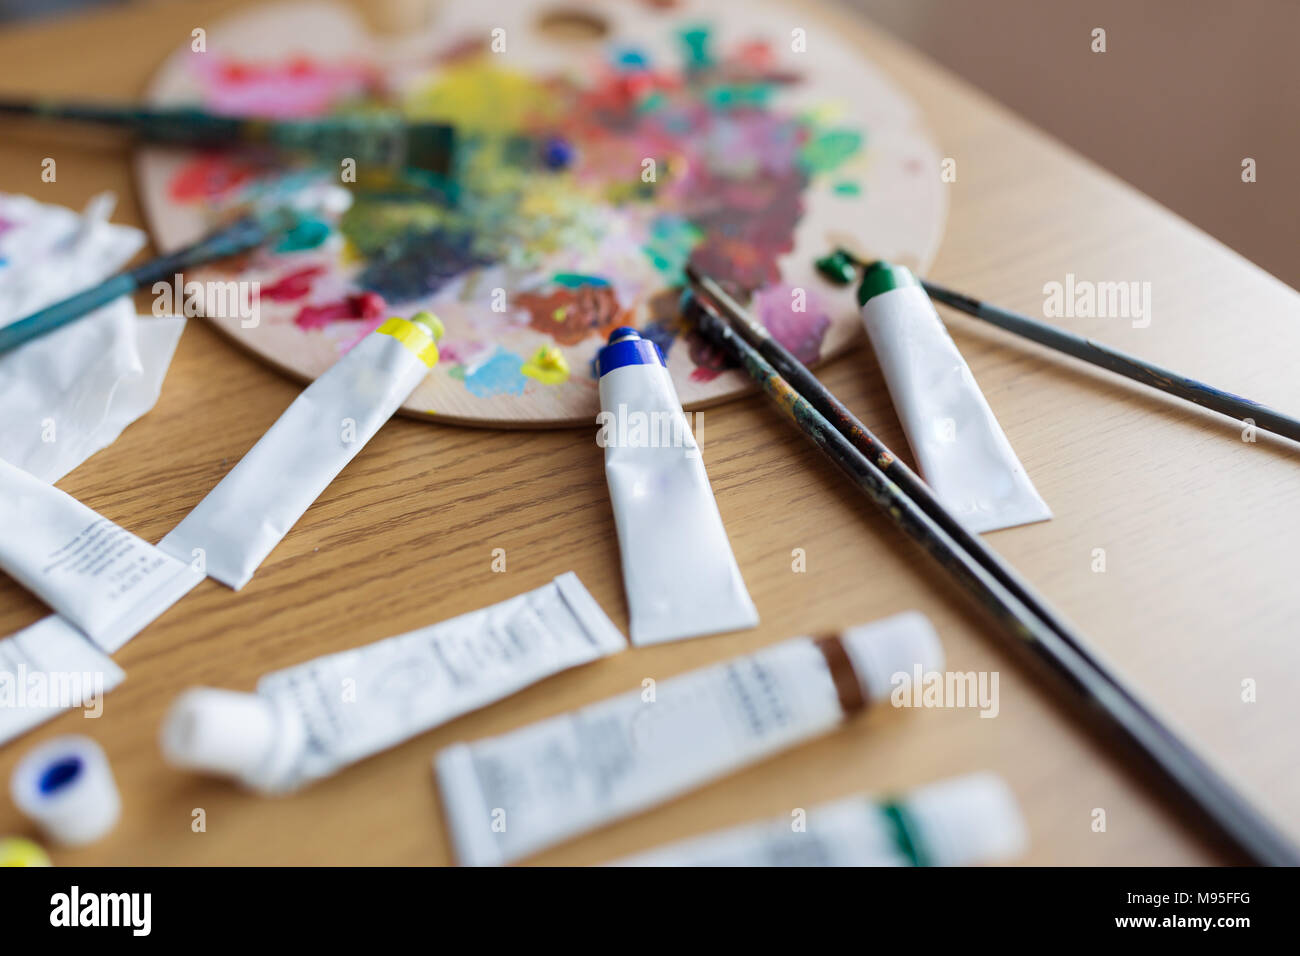 Art brushes, oil paint tubes, artist palette on wooden table Stock Photo by  ©ChamilleWhite 19857057